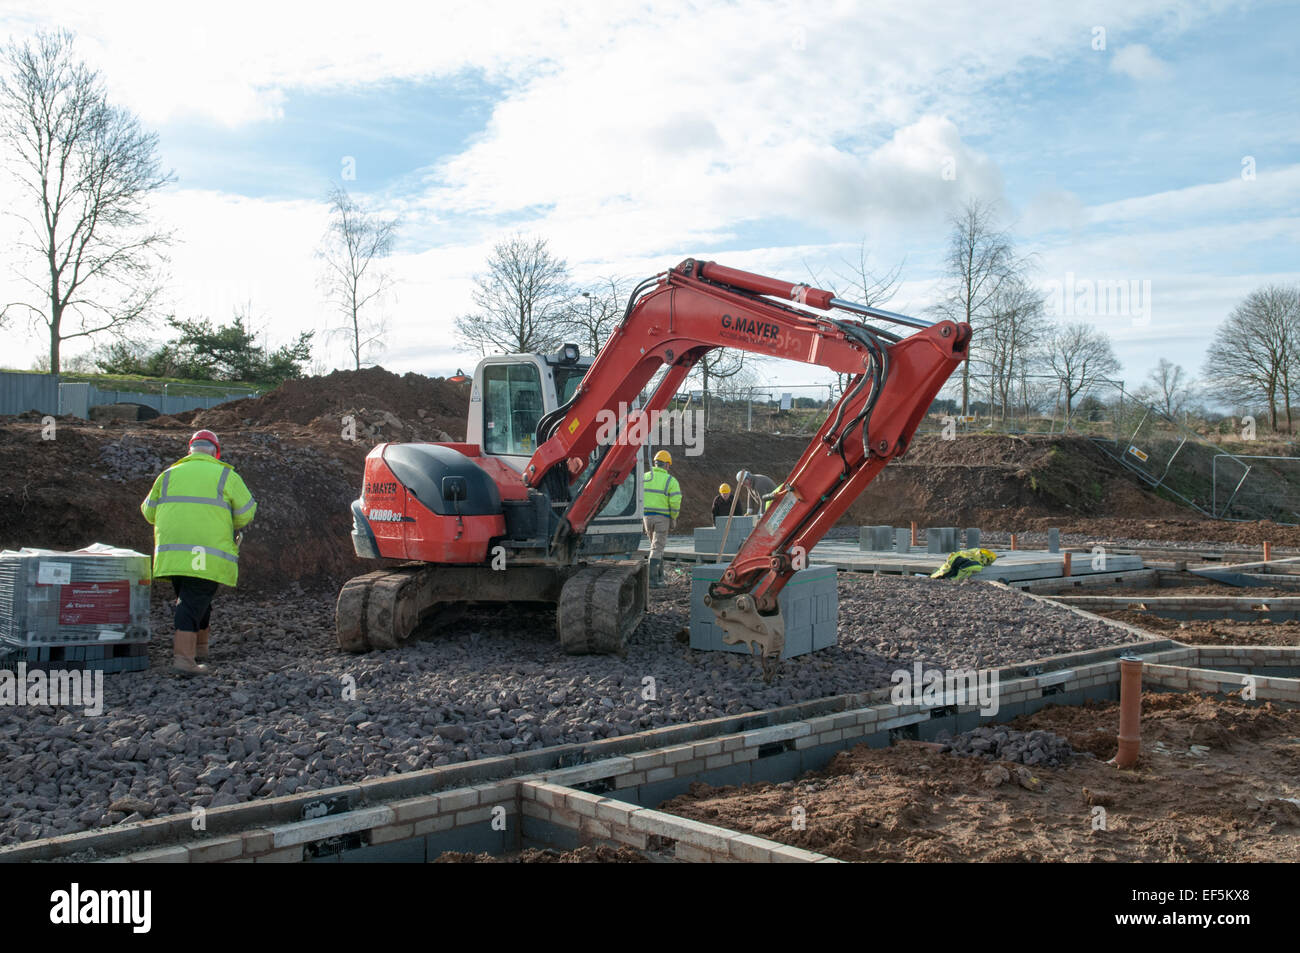 A housing building site with a digger, piles of breeze blocks and builders in hi-viz jackets working on the construction Stock Photo